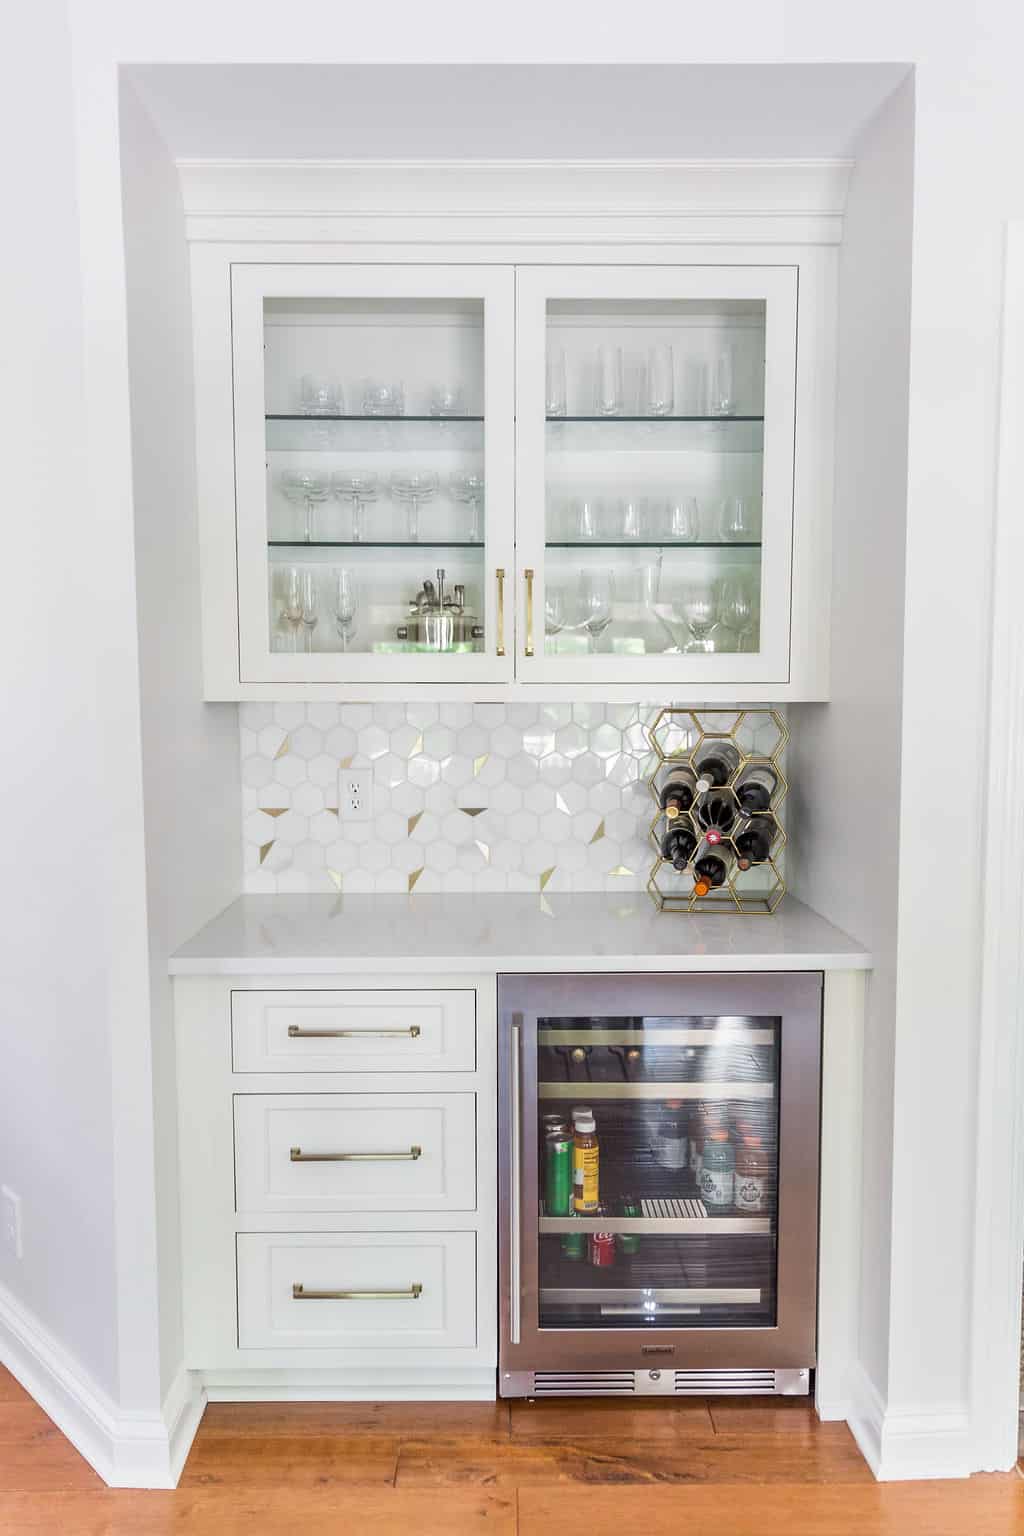 Nicholas Design Build | Remodel: A remodeled white kitchen featuring a glass door and wine cooler.